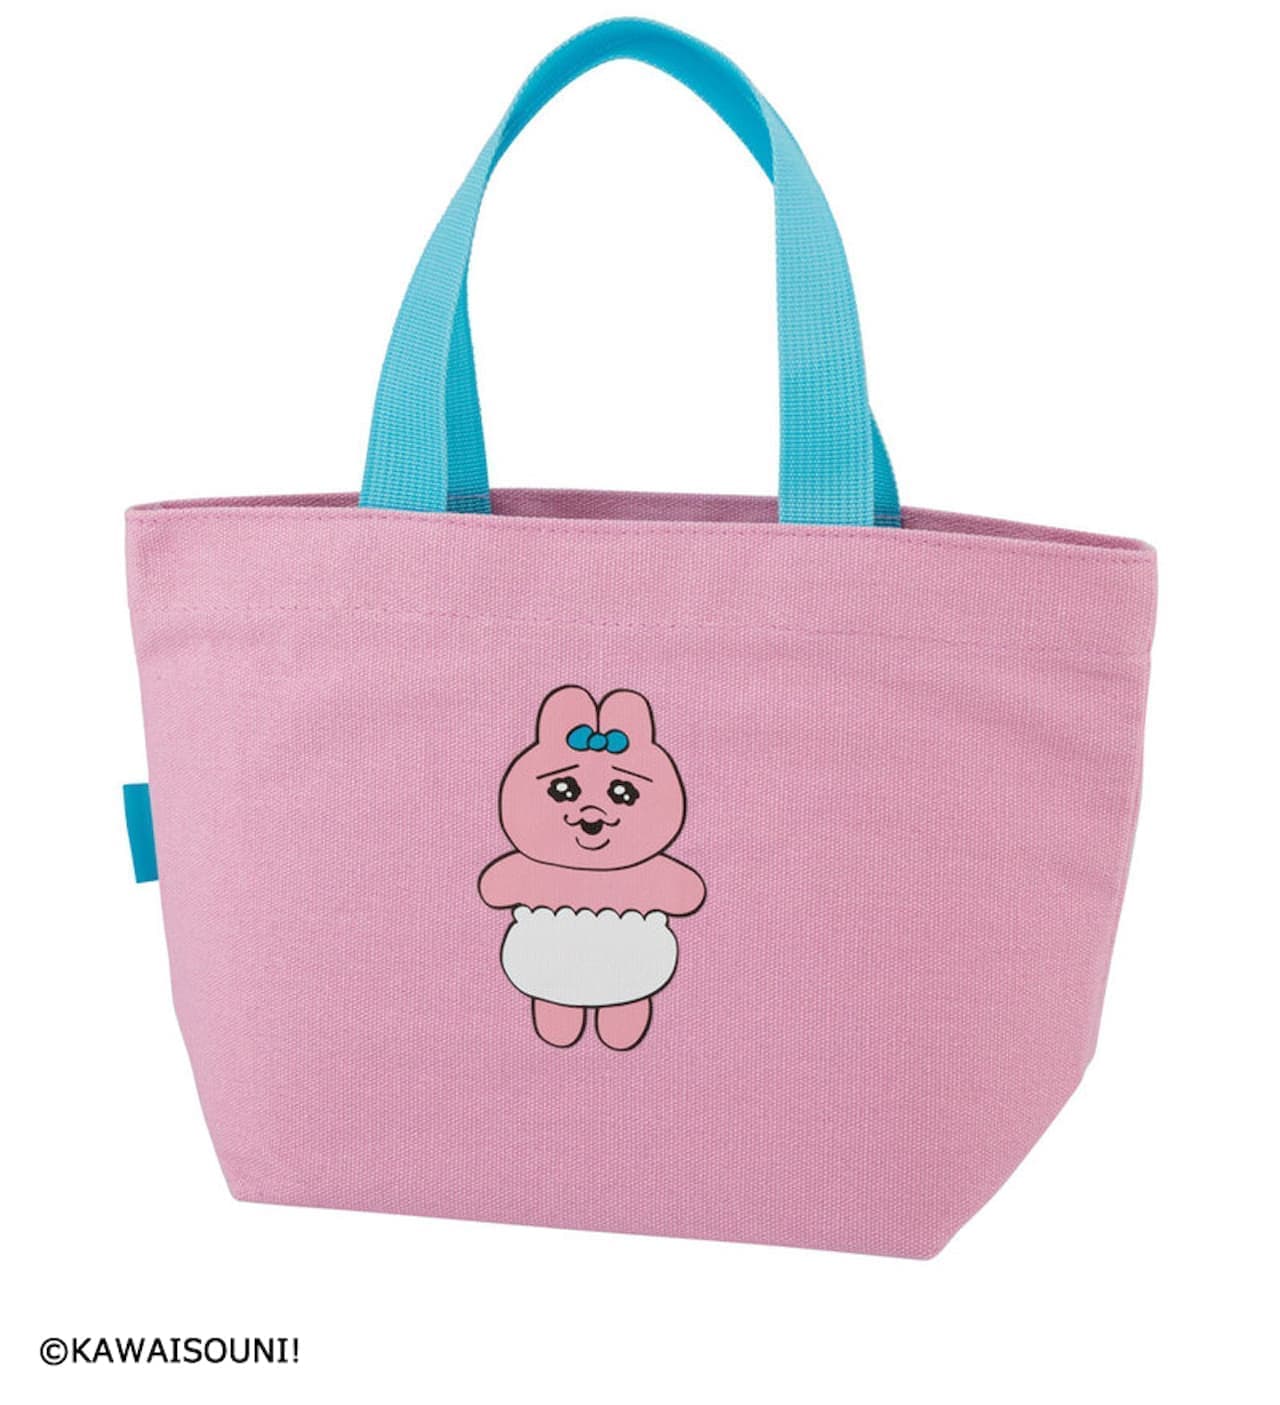 LAWSON "Lunch tote bag